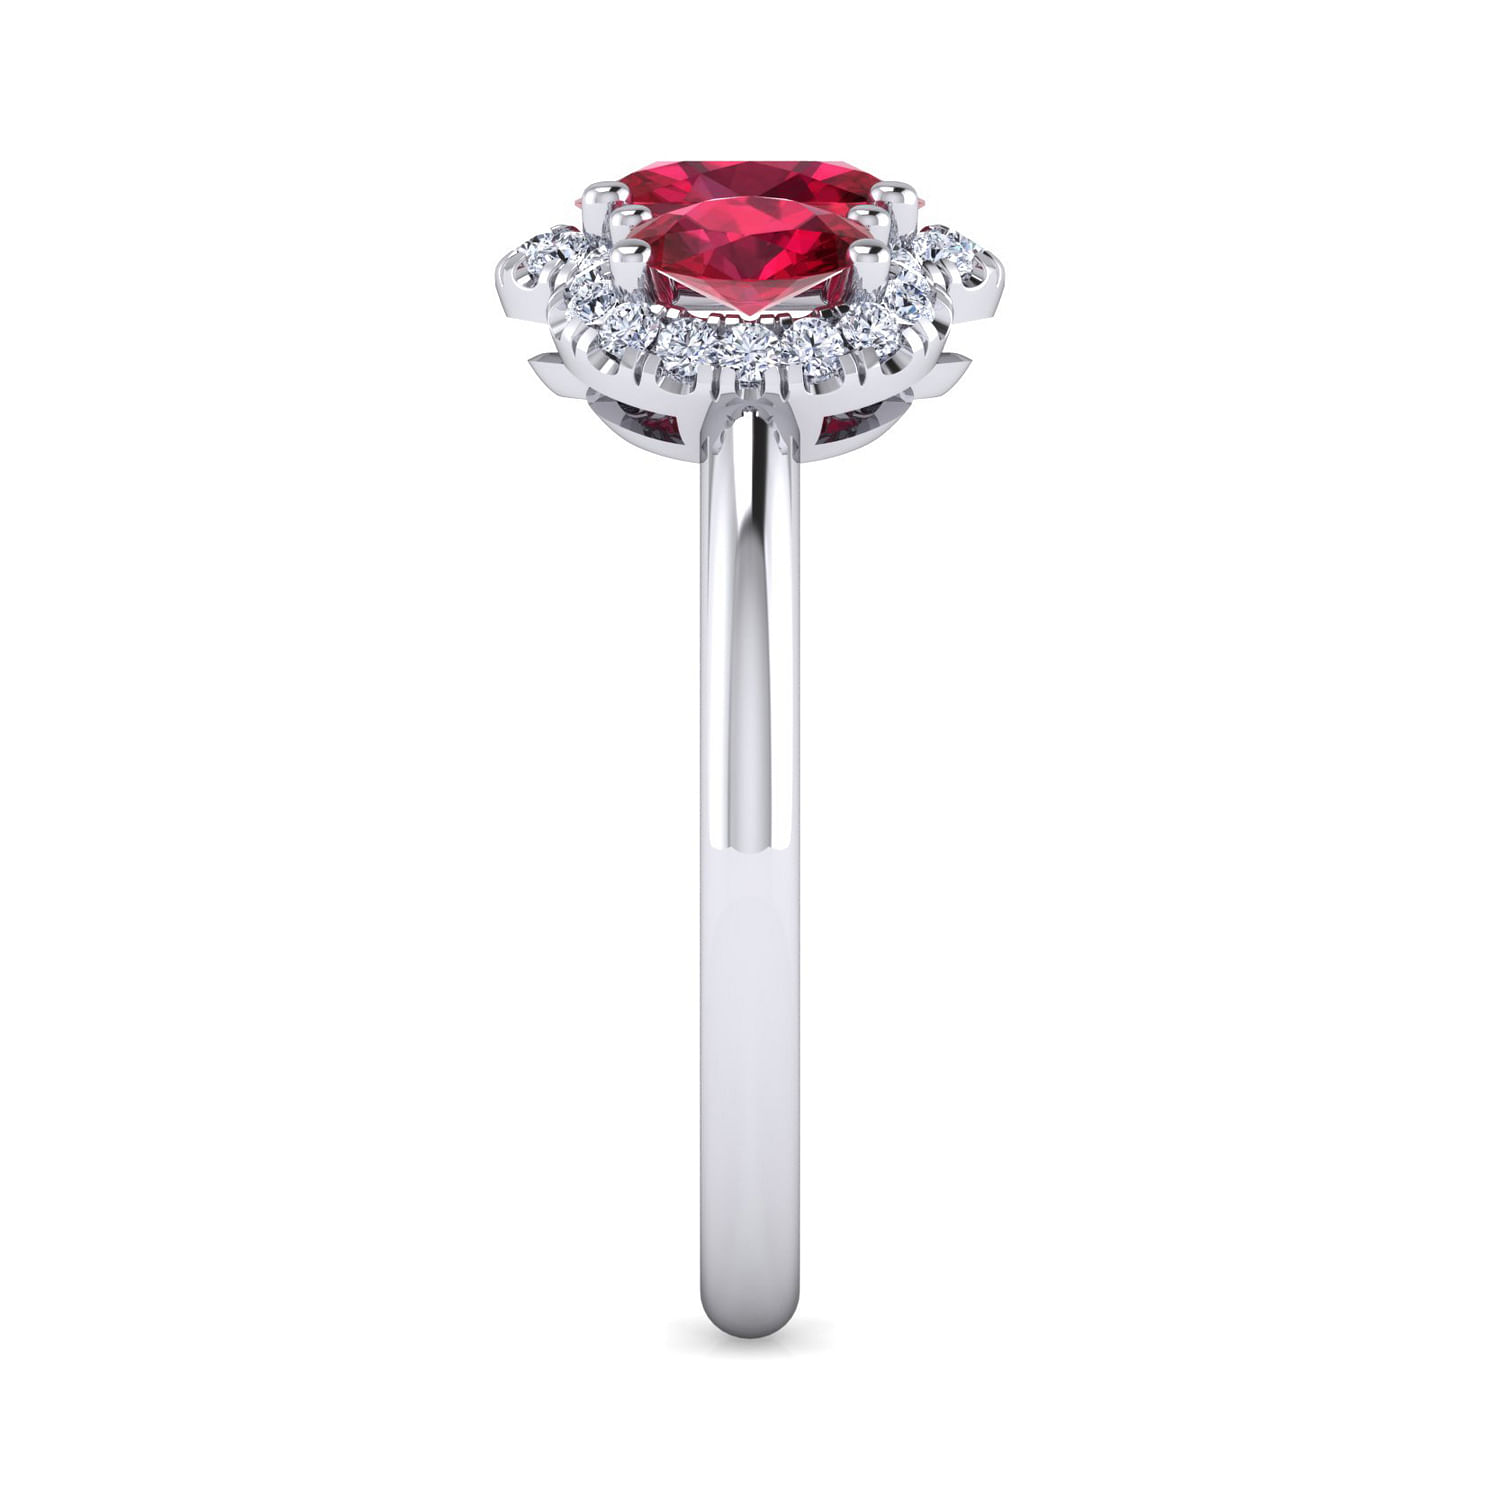 14K White Gold Diamond and Ruby Oval Halo Ring